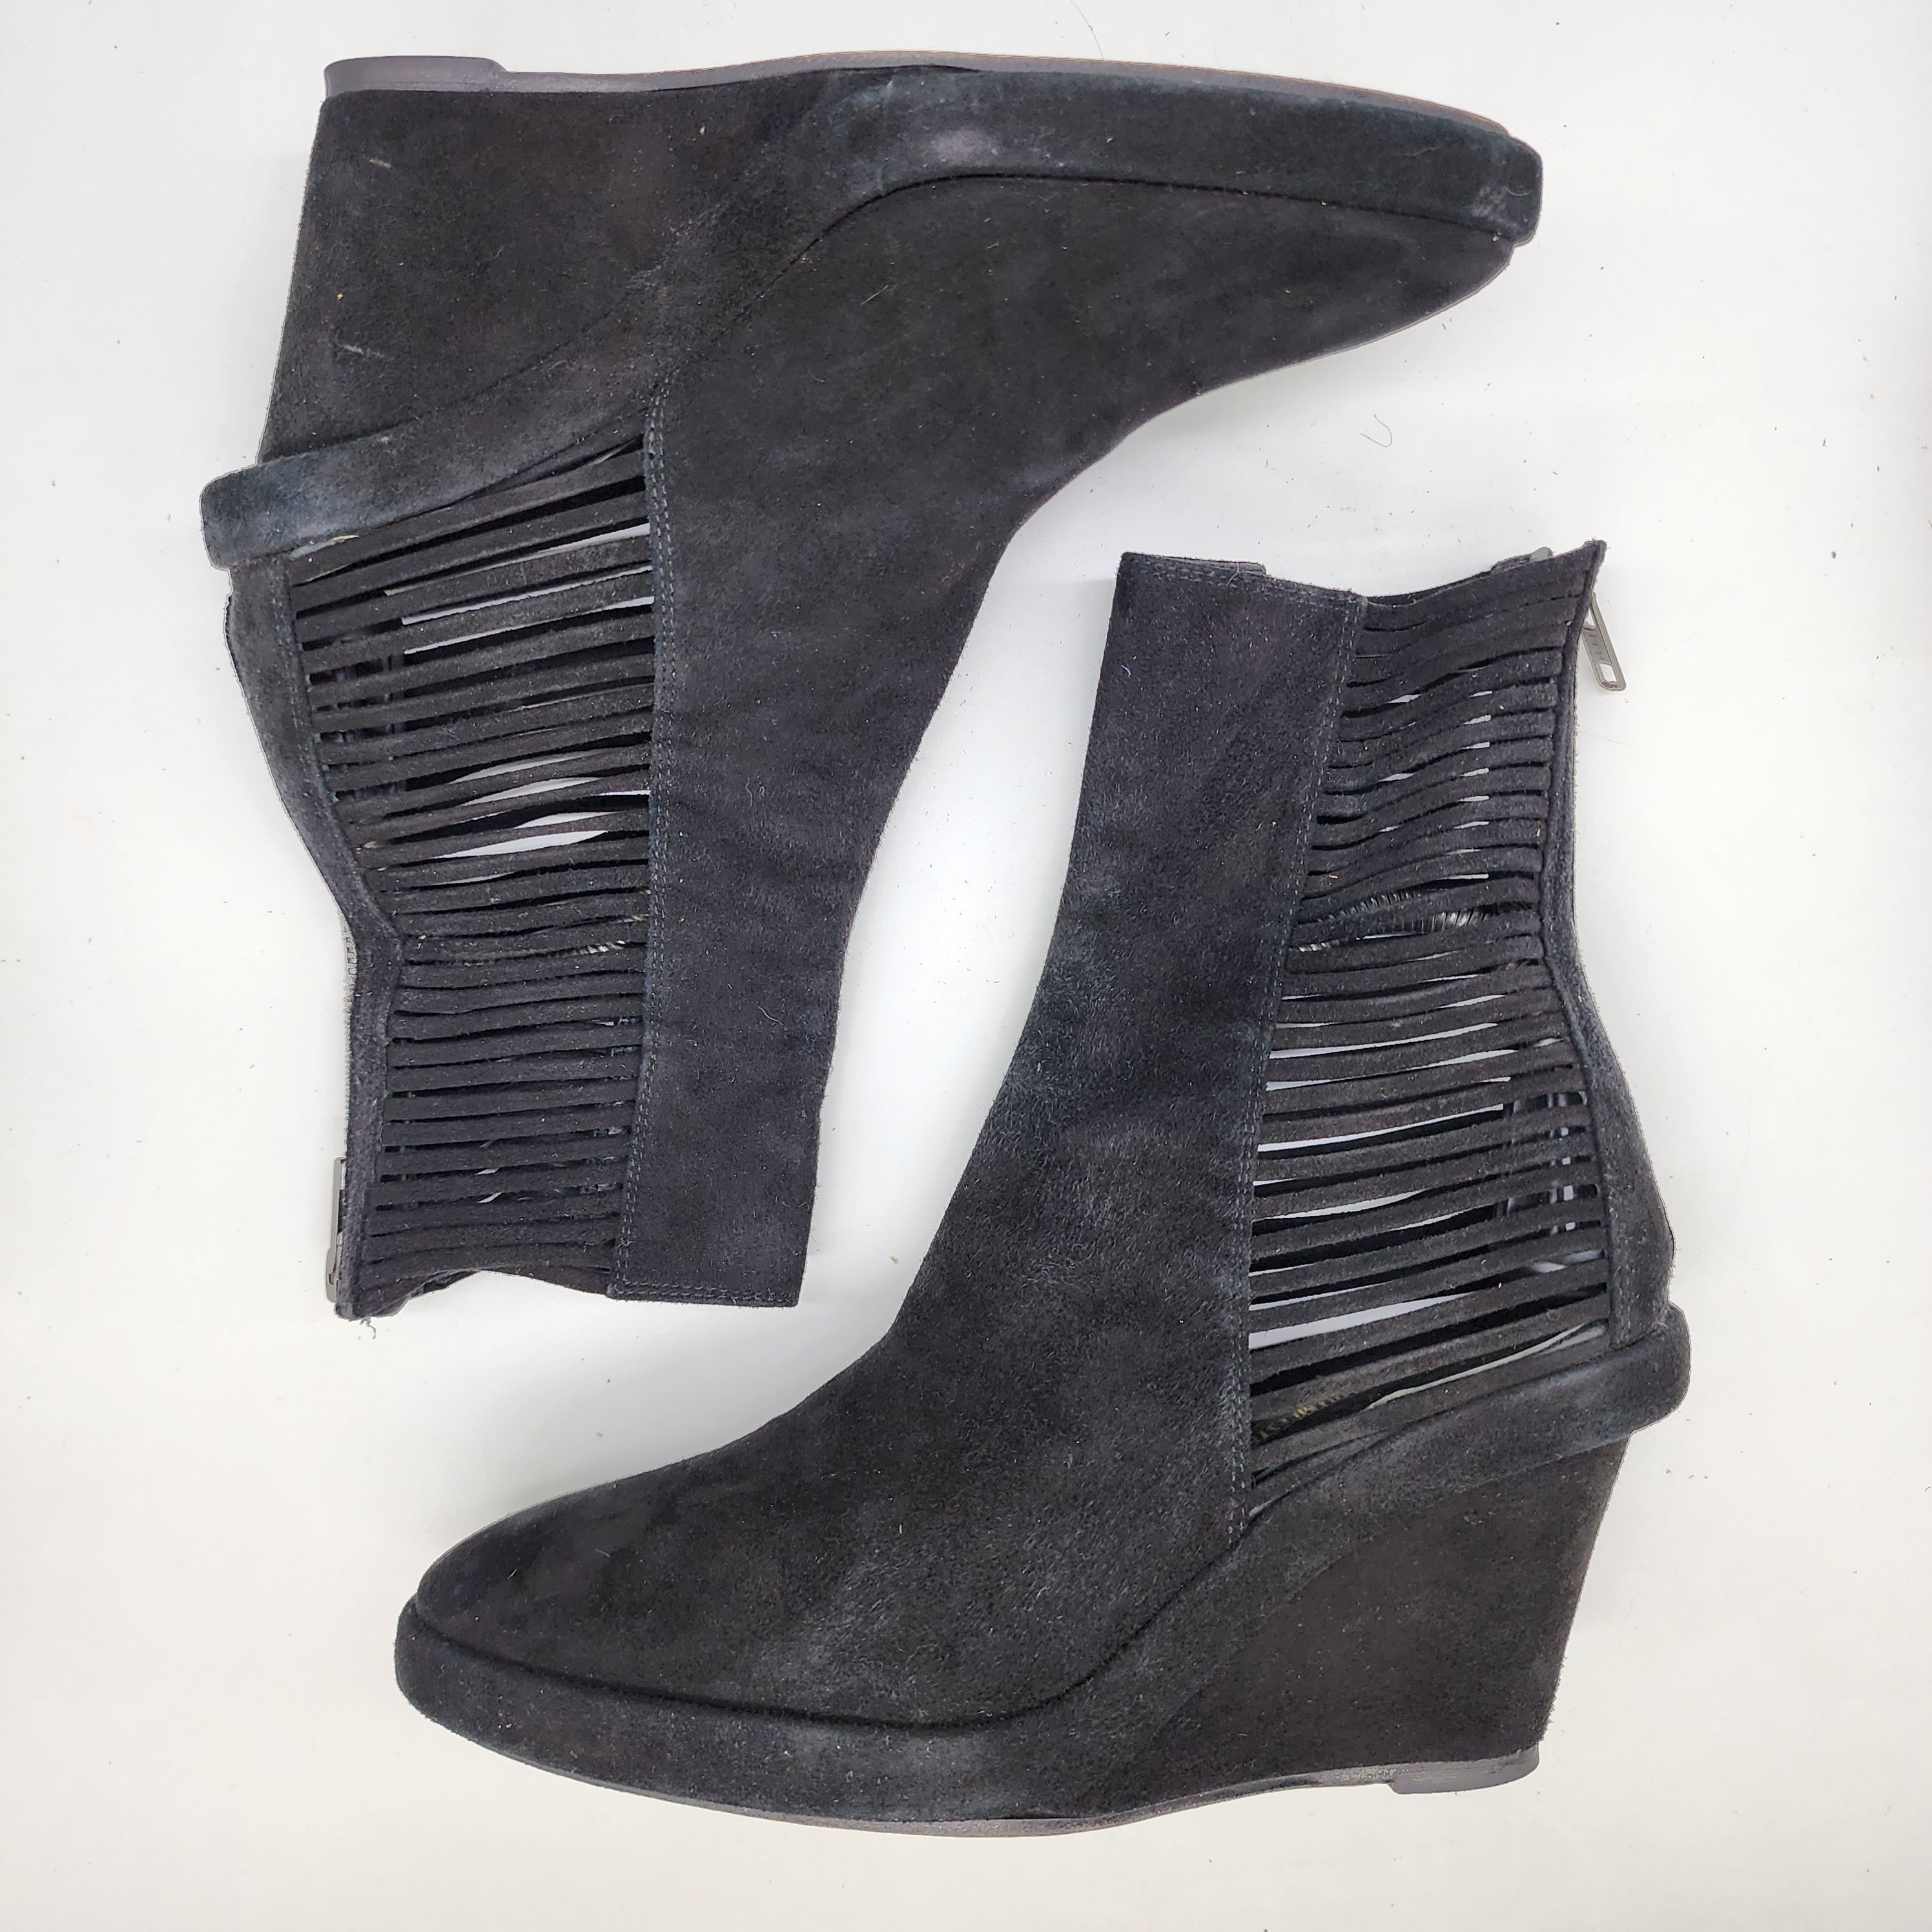 Ann Demeulemeester - Black Suede Slatted Wedge Boots - 6